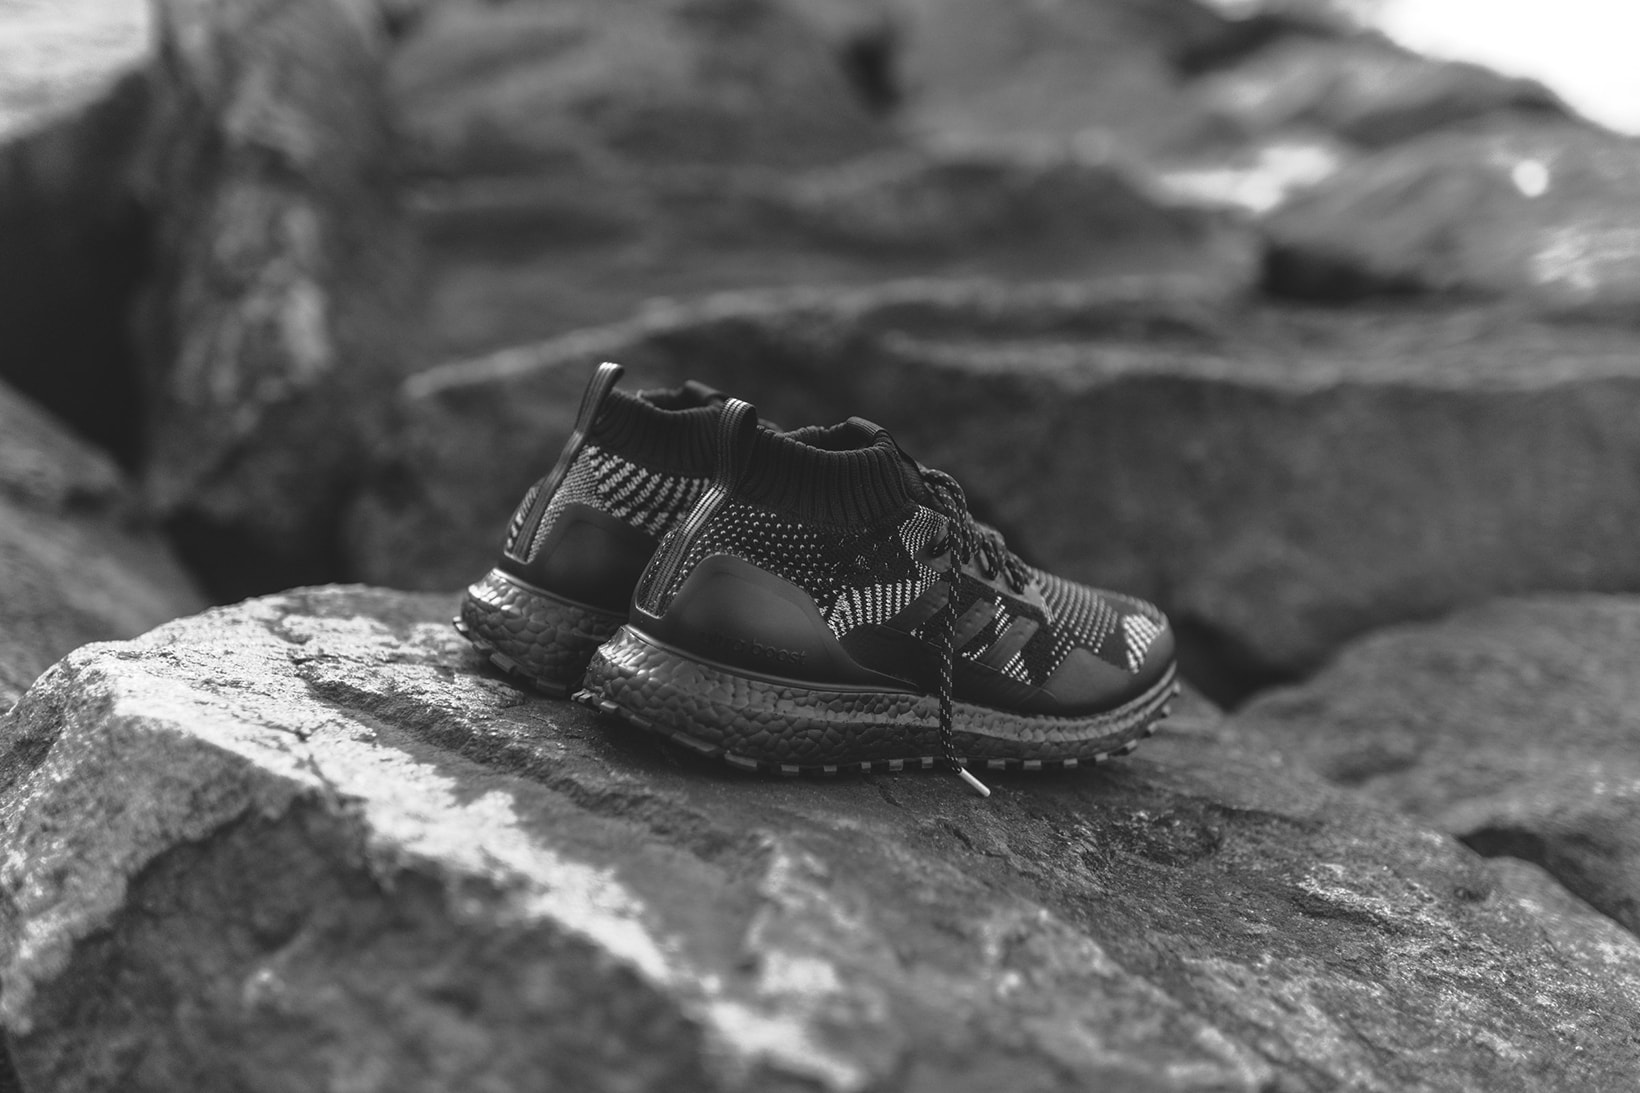 KITH nonnative adidas UltraBOOST Mid Consortium Twinstrike Originals Collaboration Japan United Arrows webstore black patchwork 3m drop release date info time app closer look black friday midnight 2017 november 24 Japan New York Ronnie Fieg KITH App